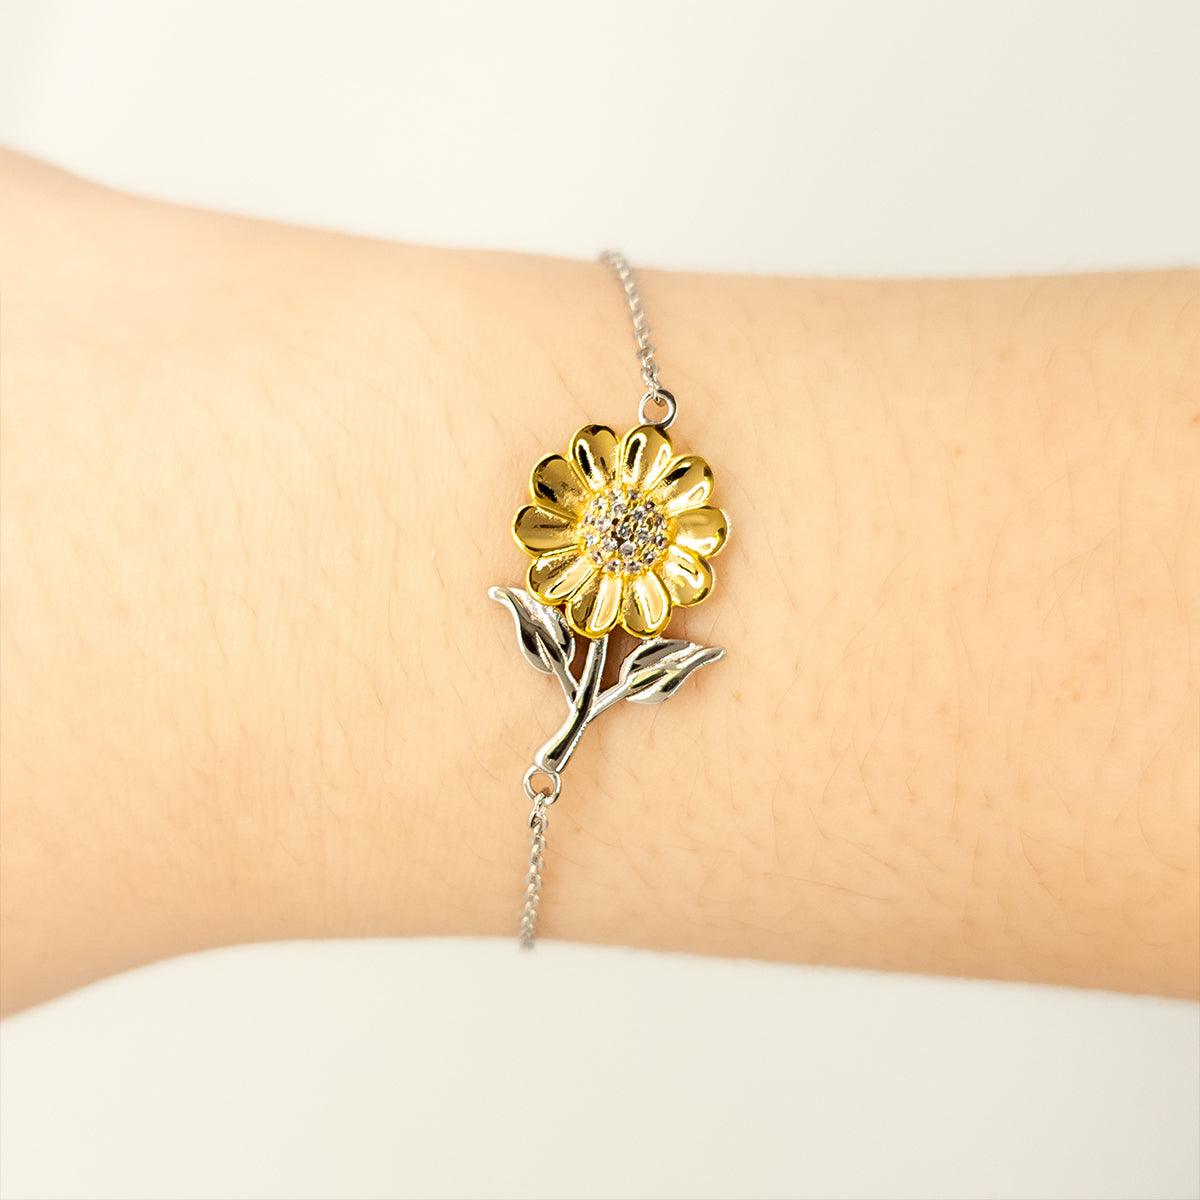 Remarkable Microbiologist Gifts, Your dedication and hard work, Inspirational Birthday Christmas Unique Sunflower Bracelet For Microbiologist, Coworkers, Men, Women, Friends - Mallard Moon Gift Shop